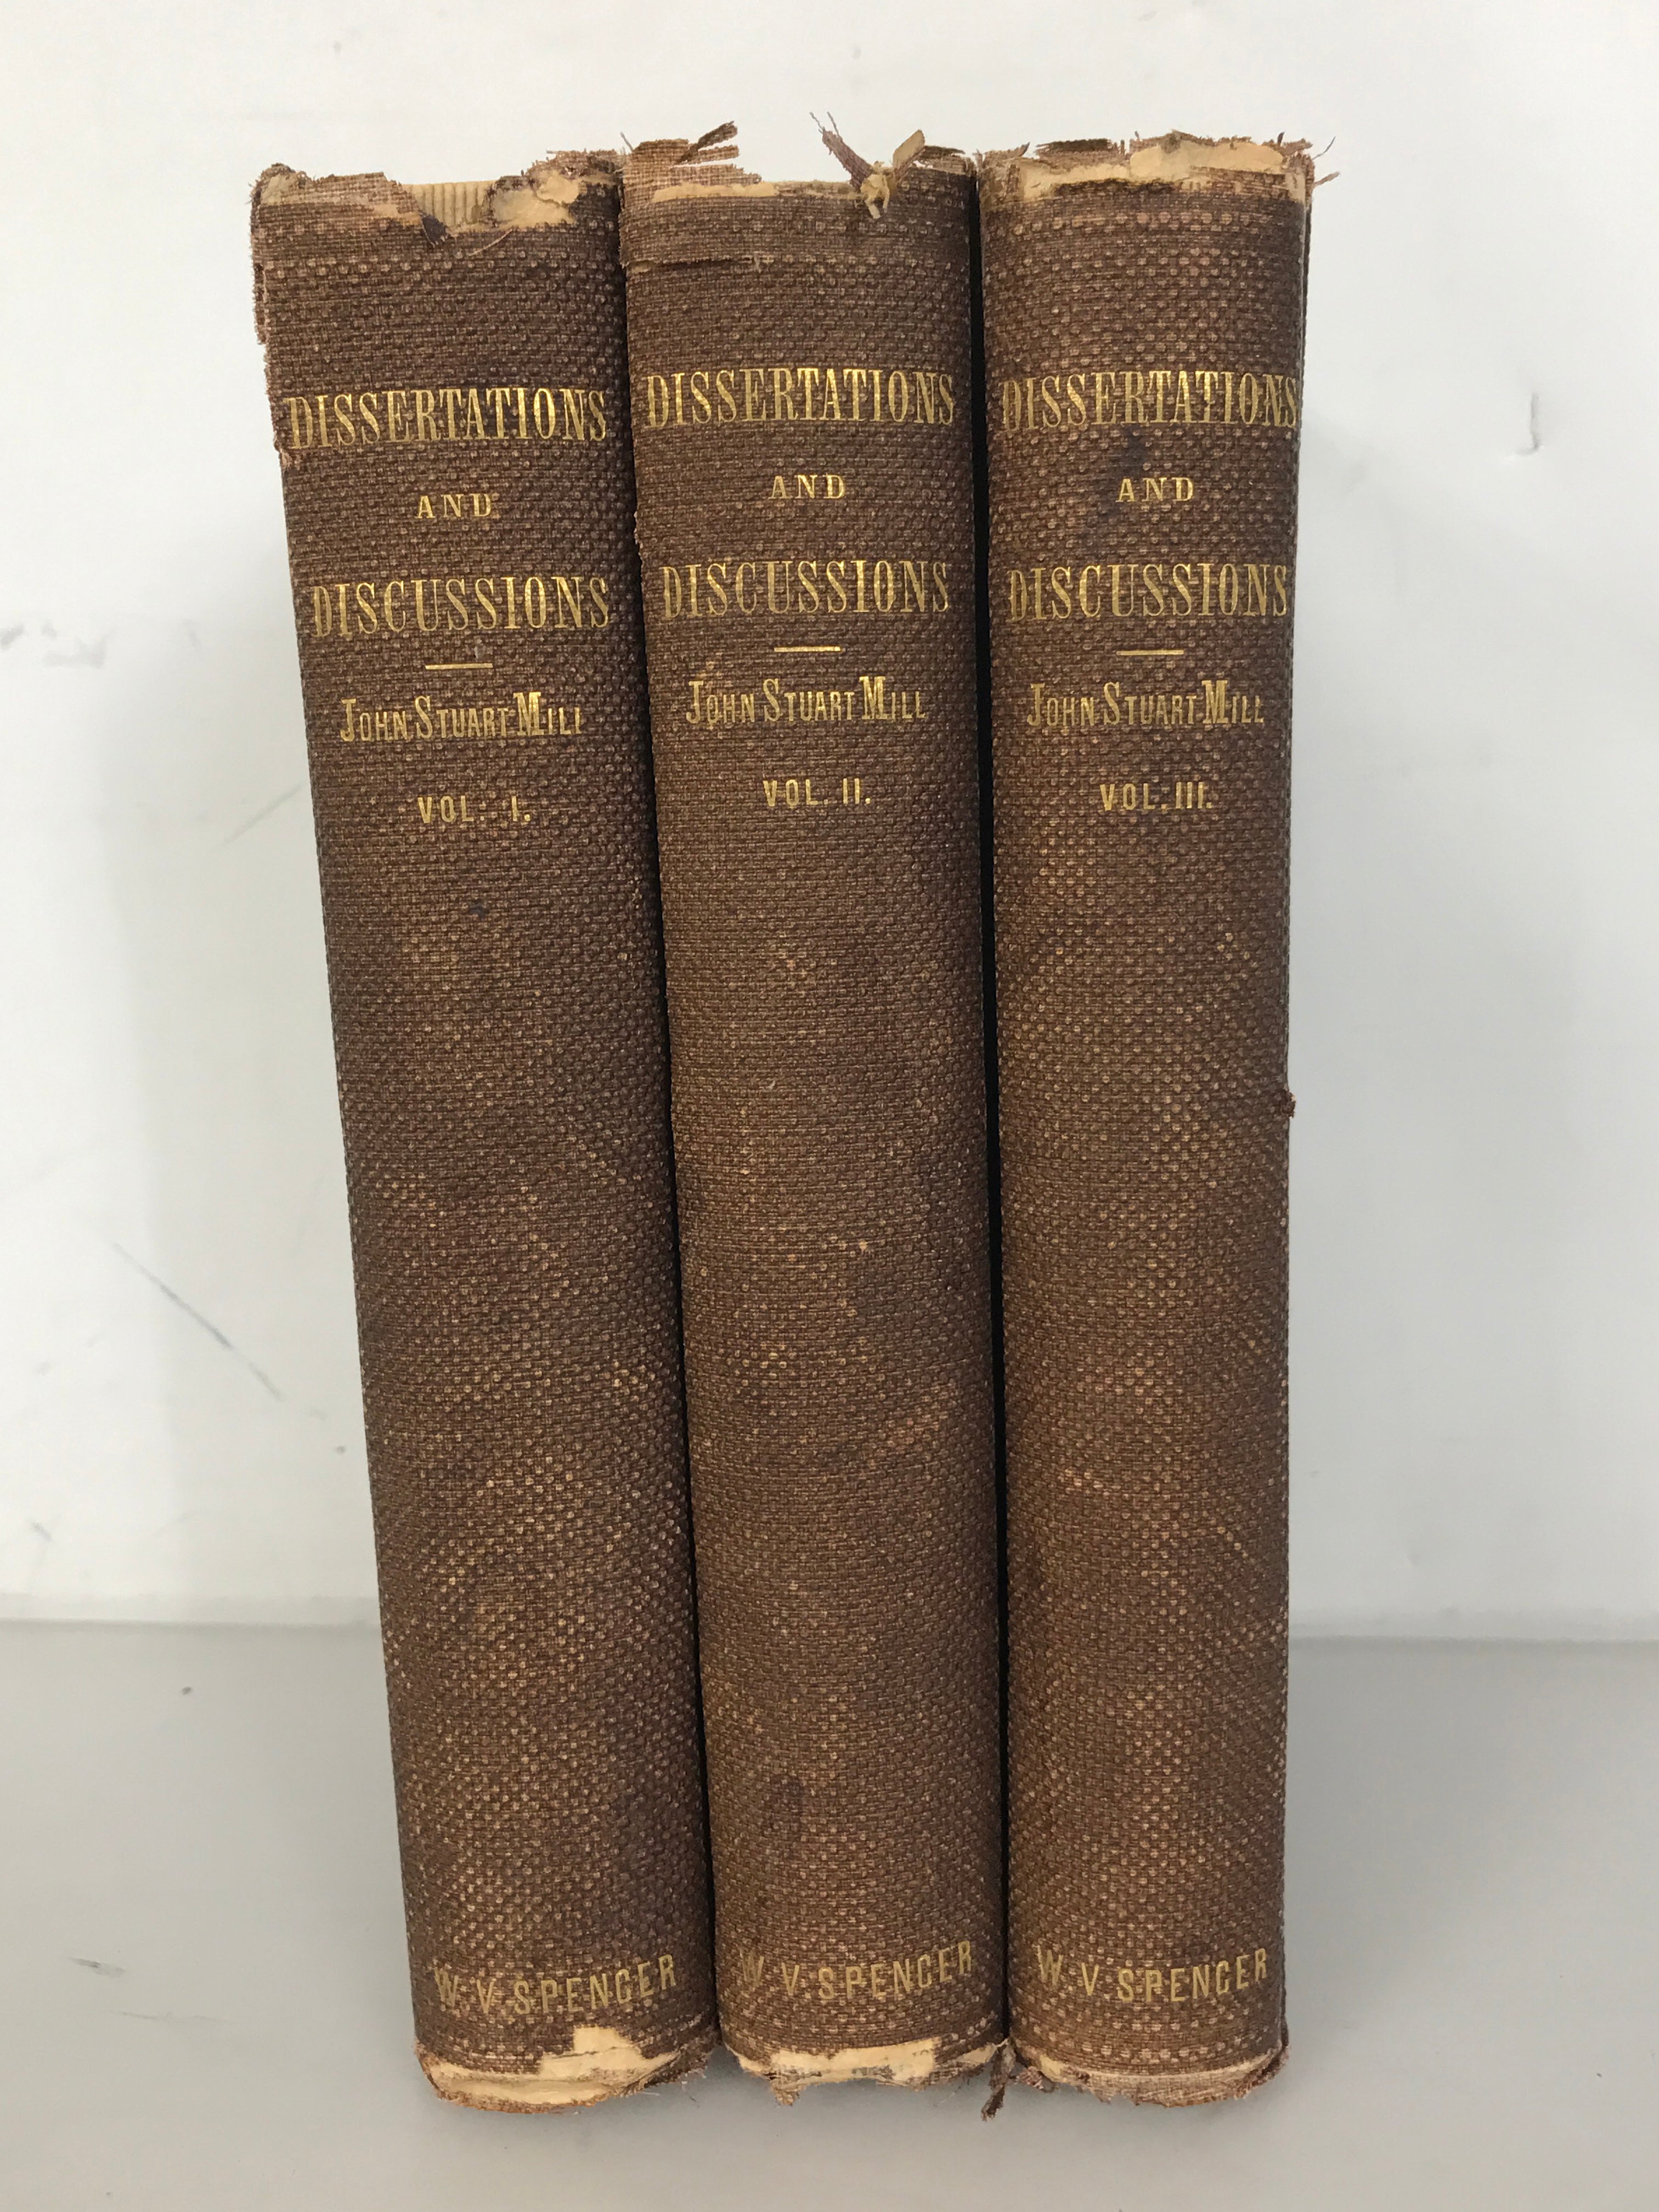 Complete 3 Volume Set: Dissertations and Discussions 1864 Antique HC